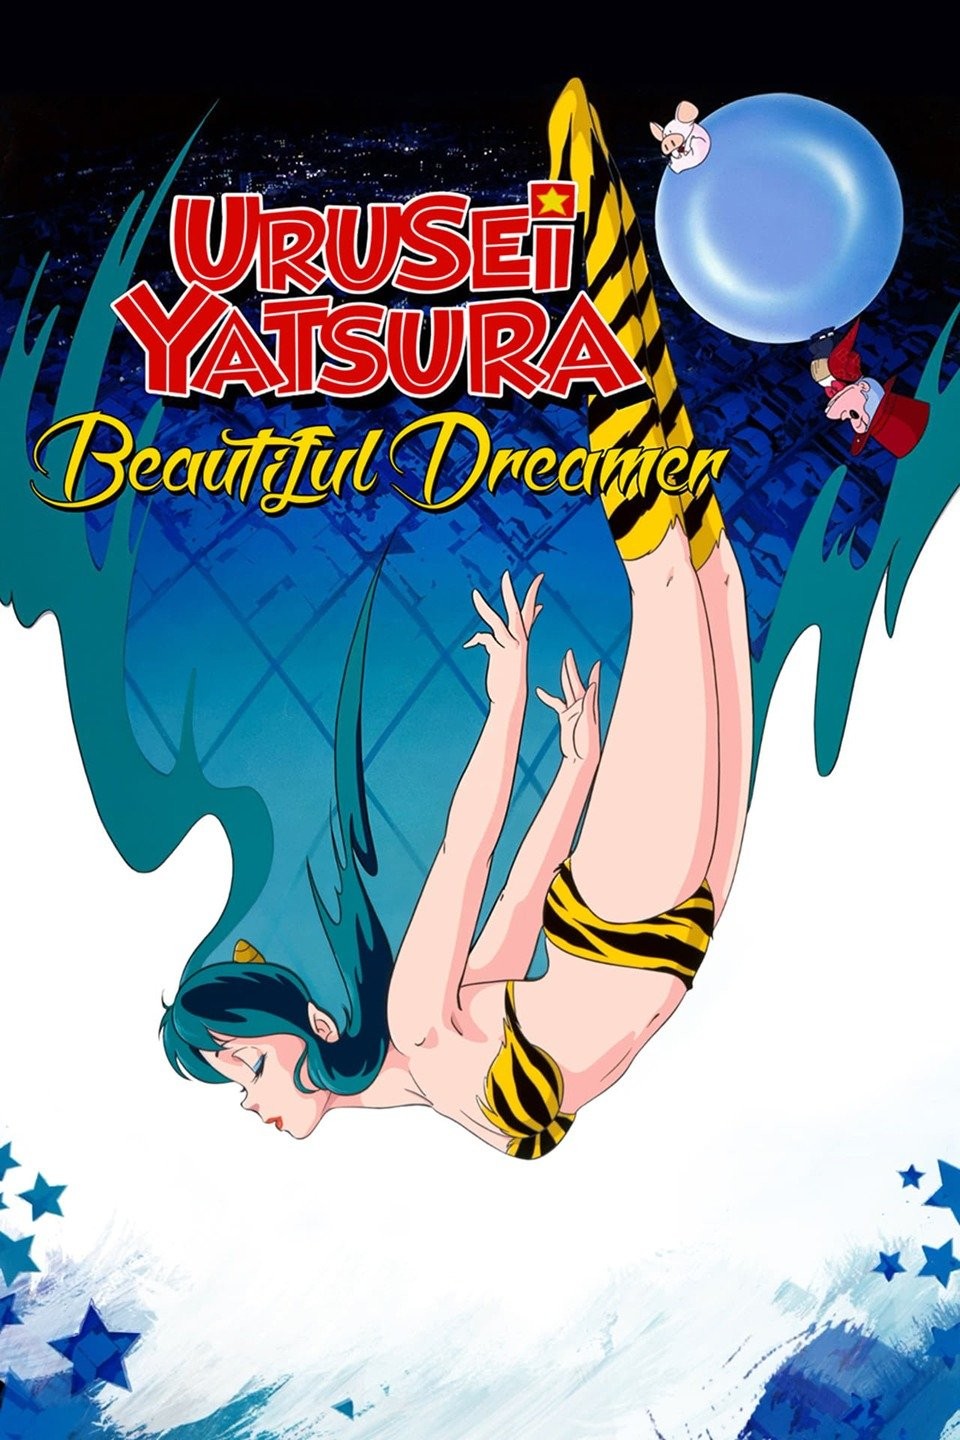 Urusei Yatsura episode 5 release date, where to watch, what to expect, and  more